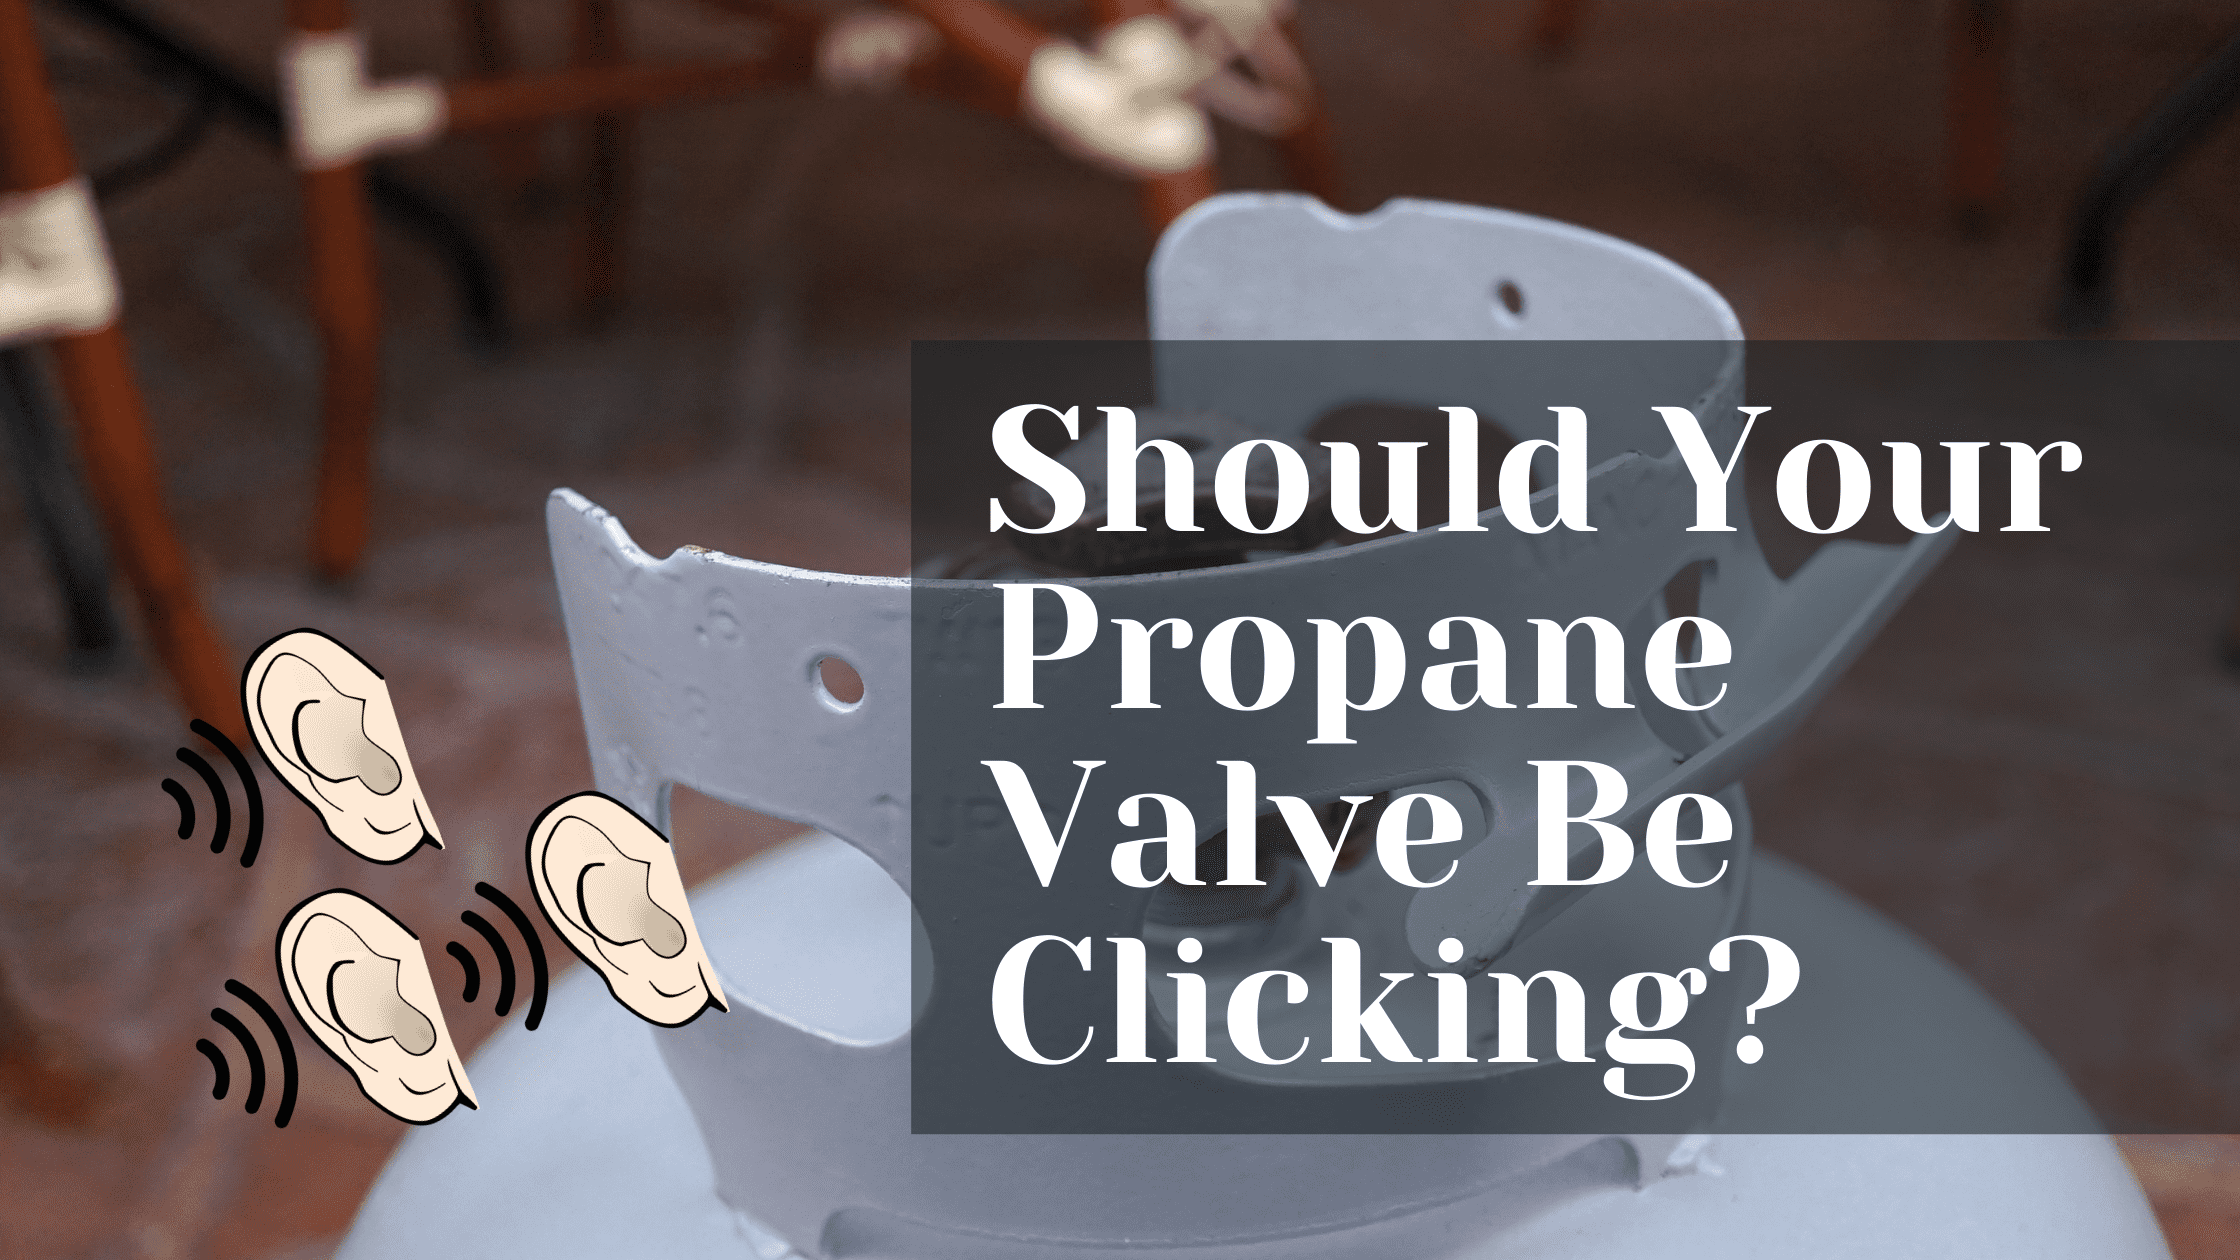 Why Is Your Propane Tank Valve “Clicking” When You Open It?